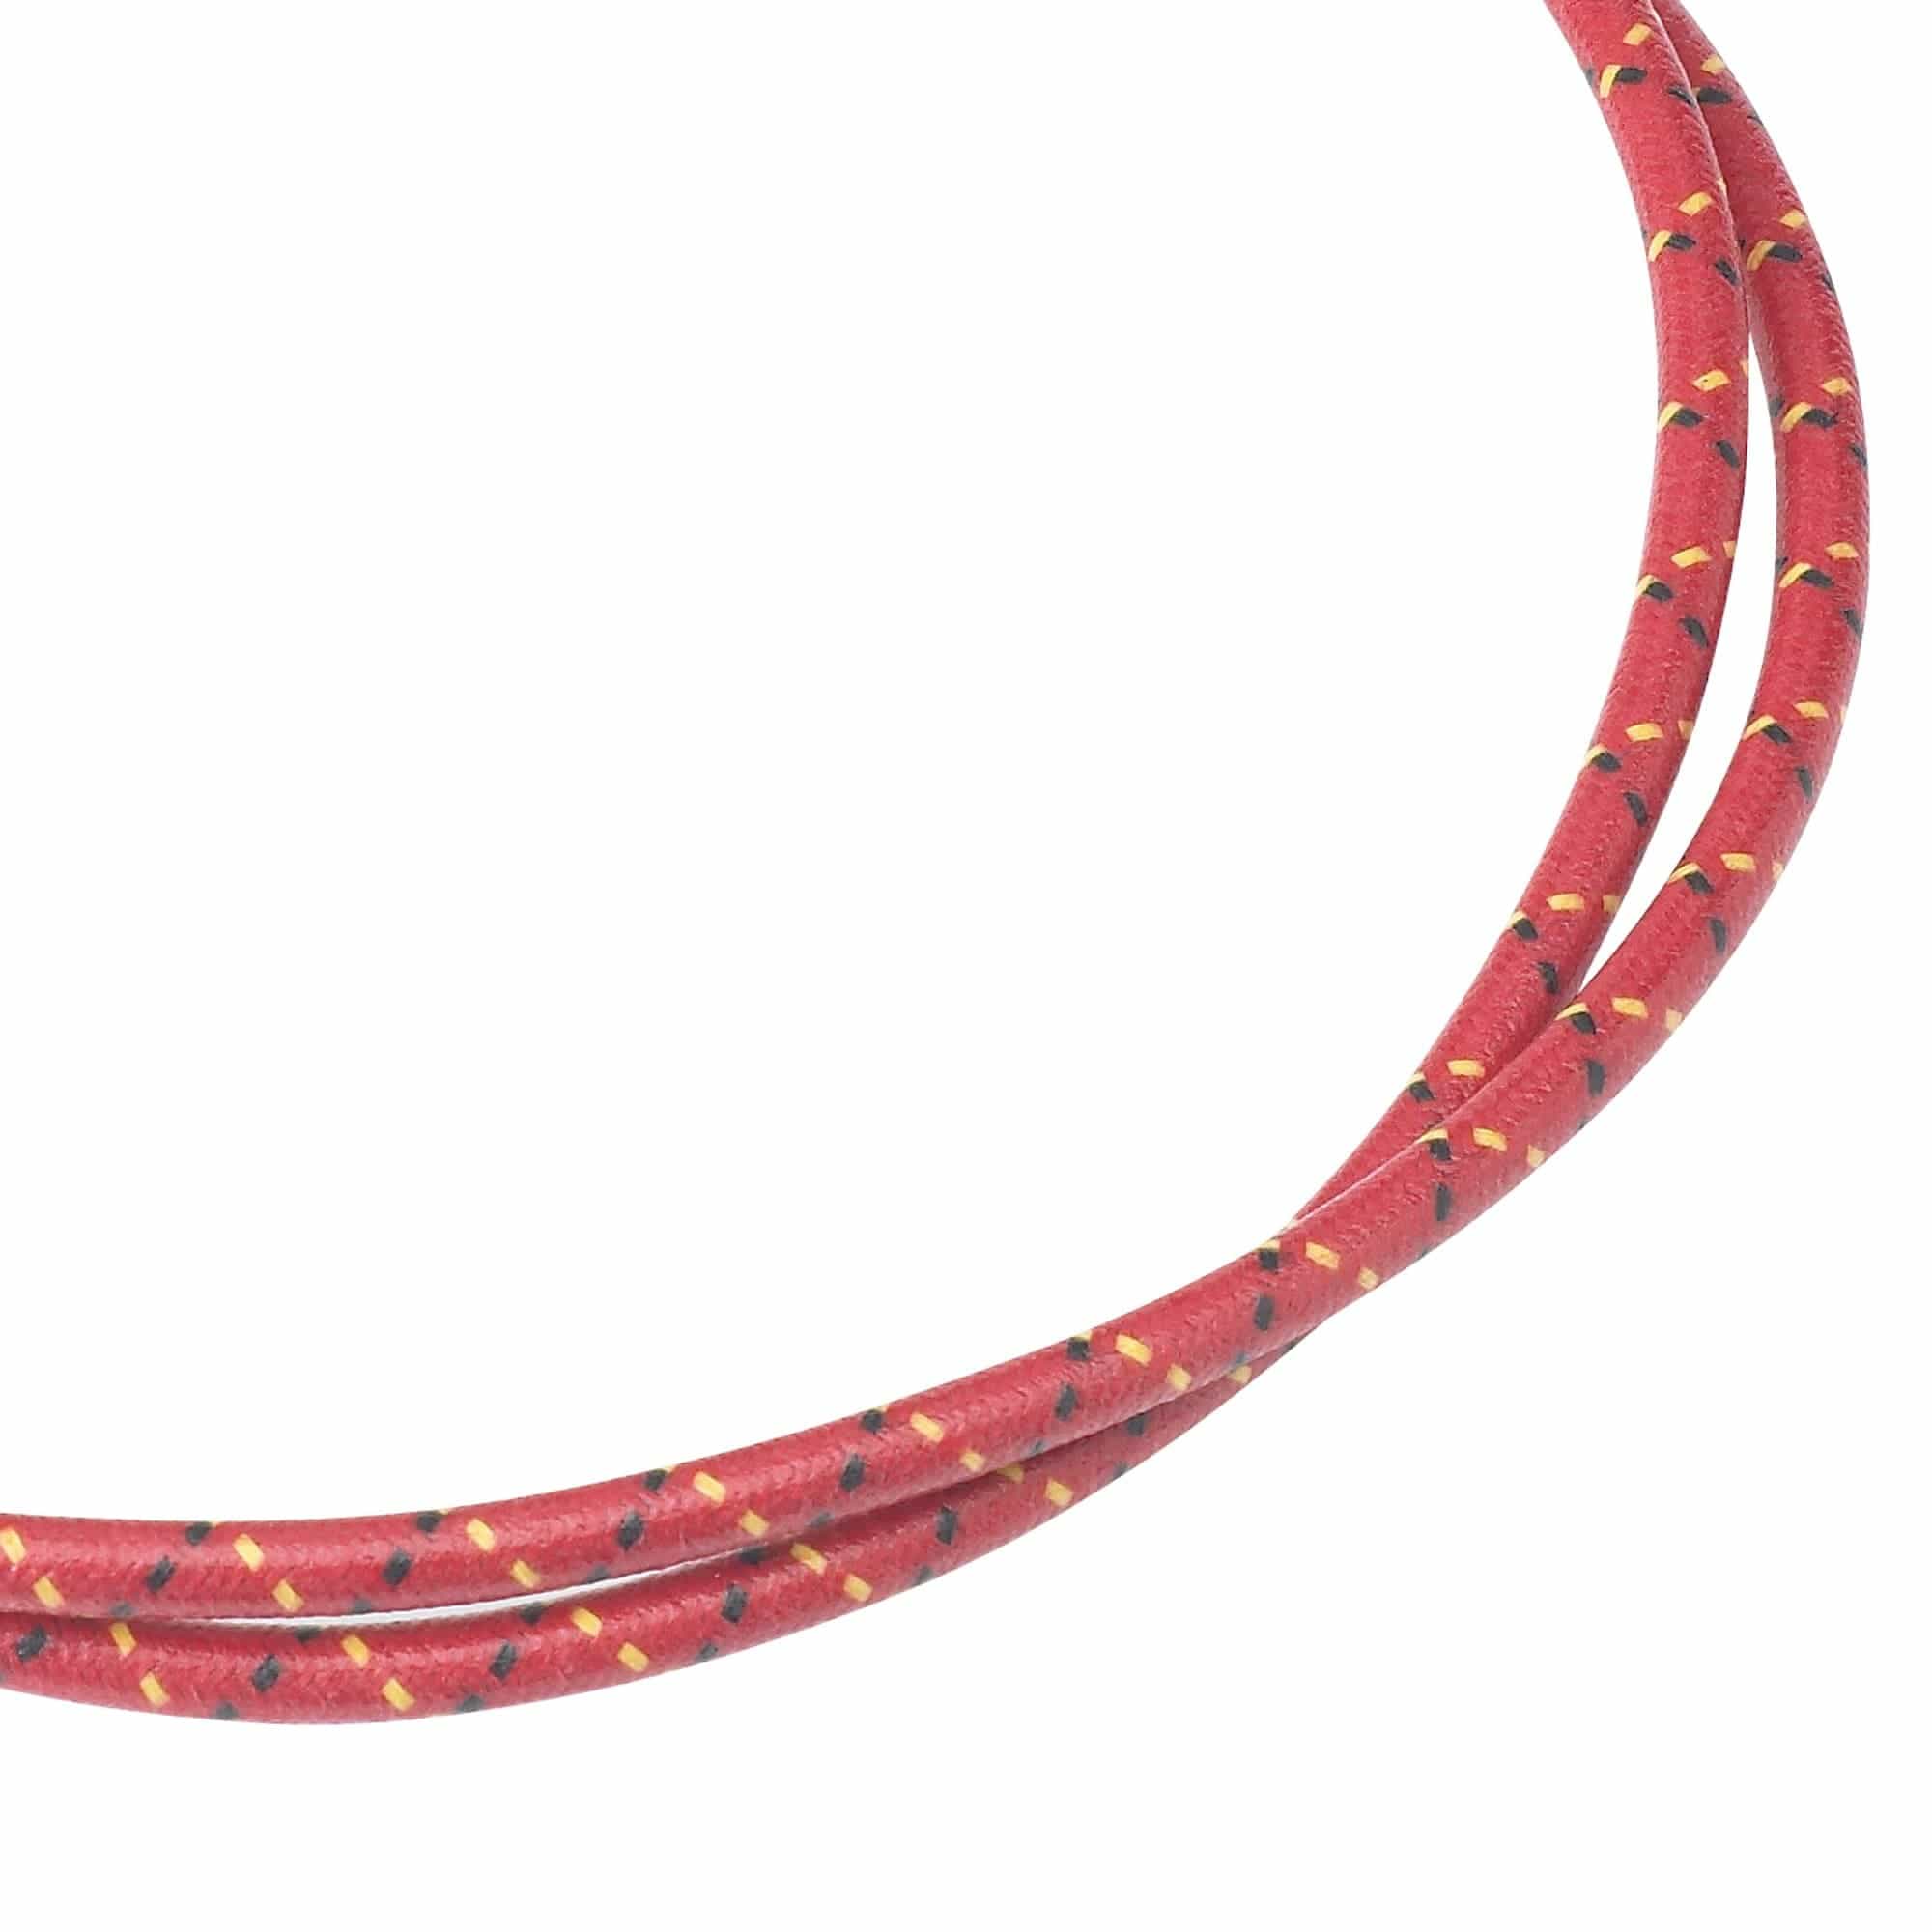 7mm Cord - Red w/ Yellow per Foot